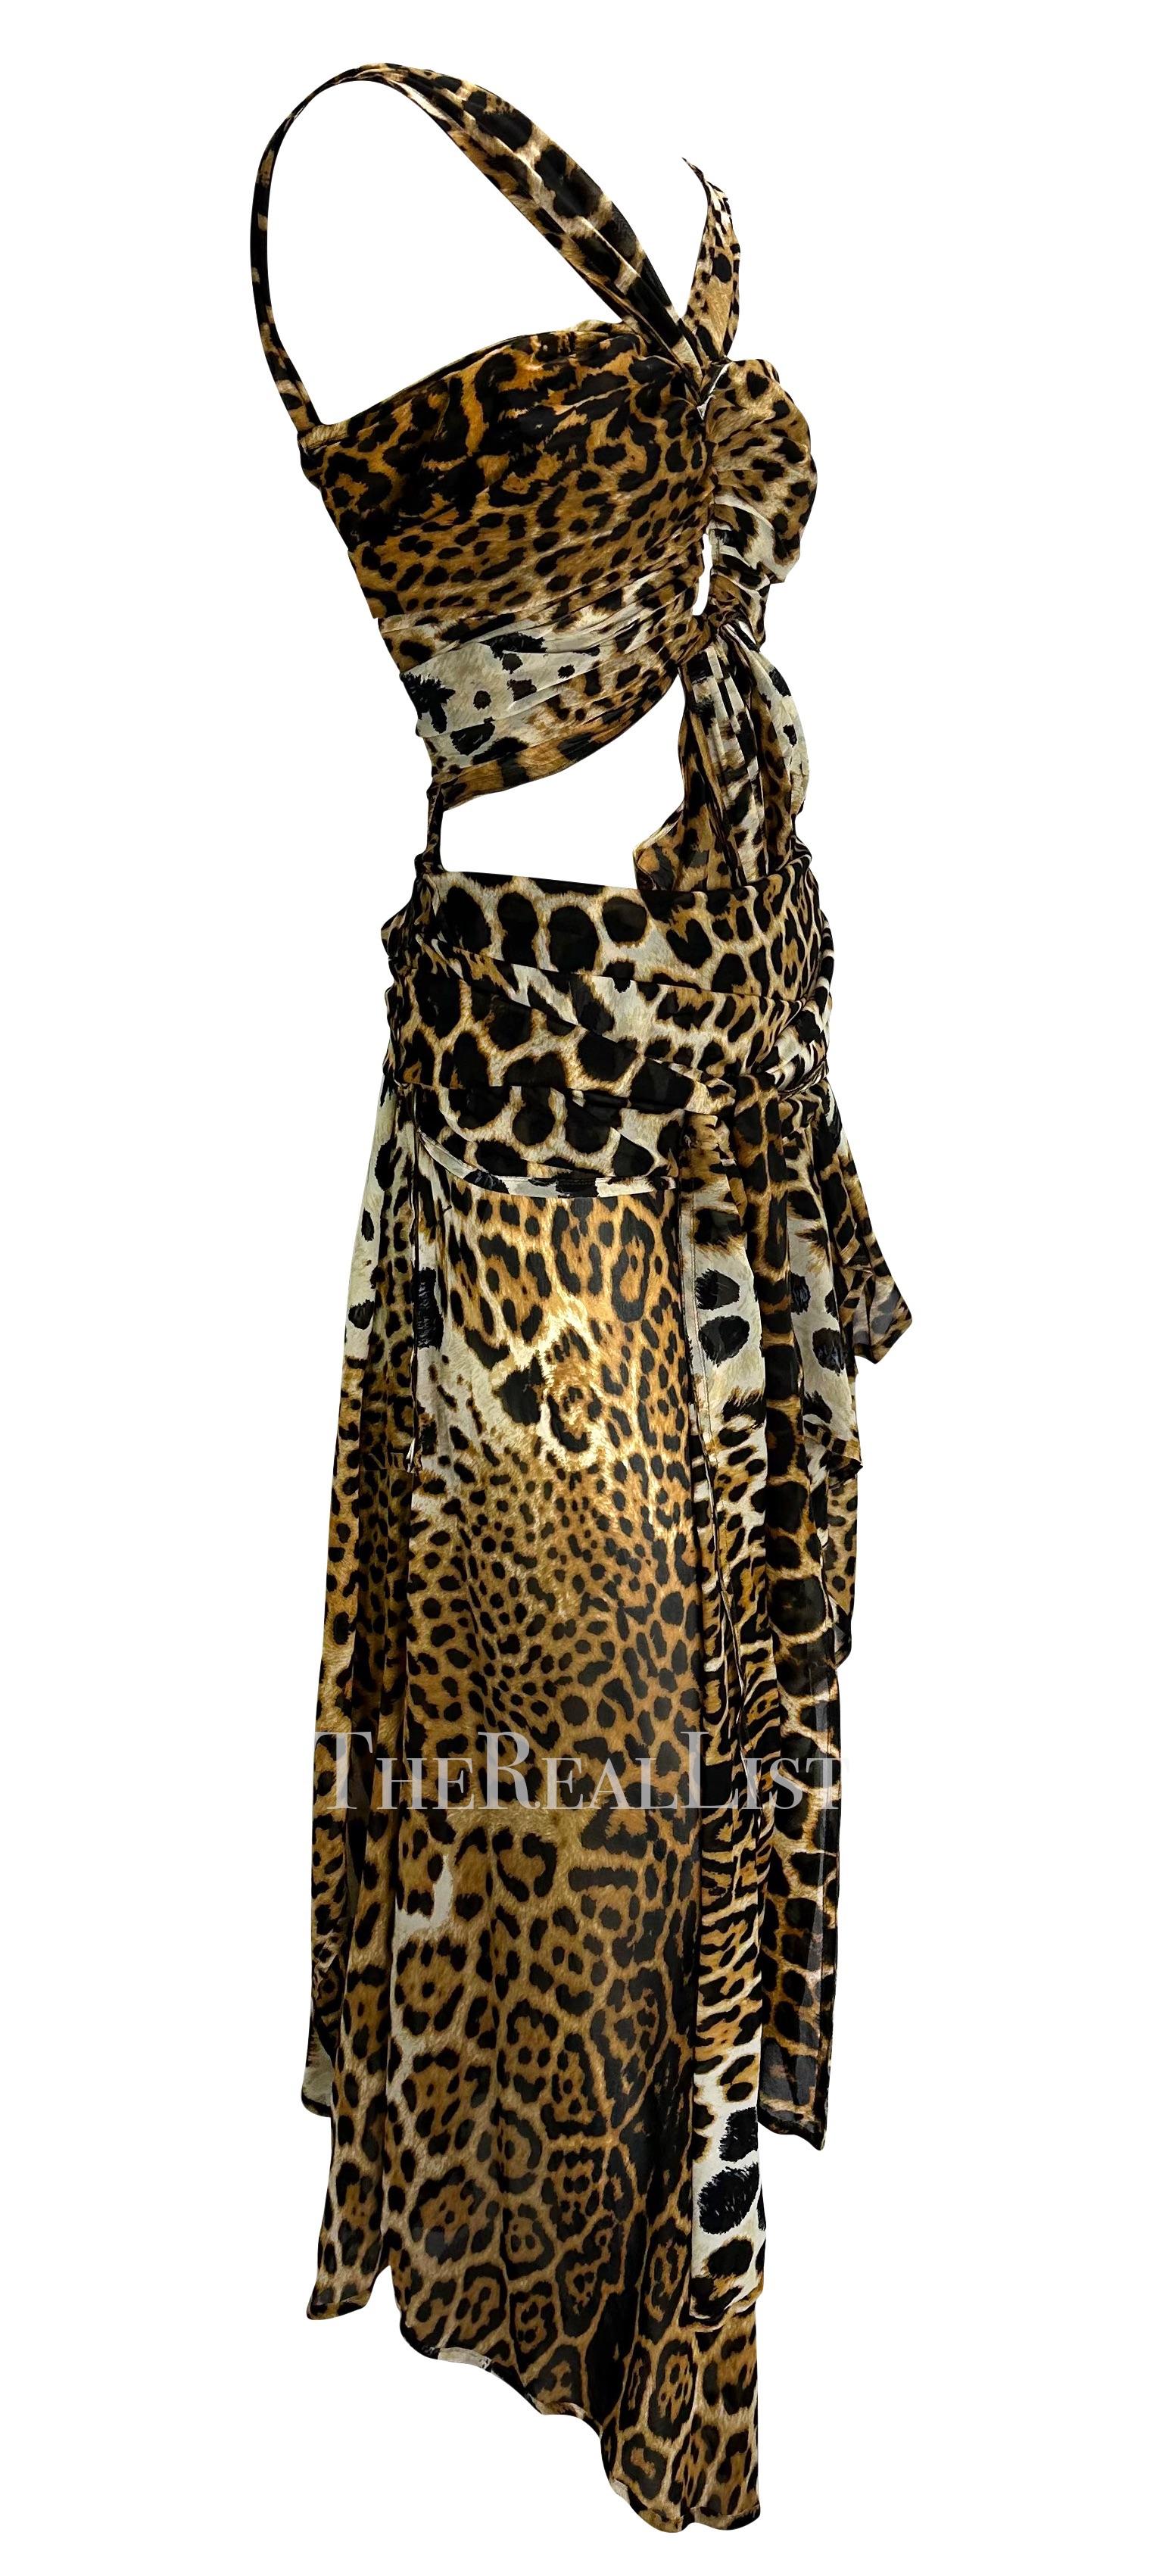 S/S 2002 Yves Saint Laurent by Tom Ford Runway Cheetah Print Chiffon Wrap Gown For Sale 11